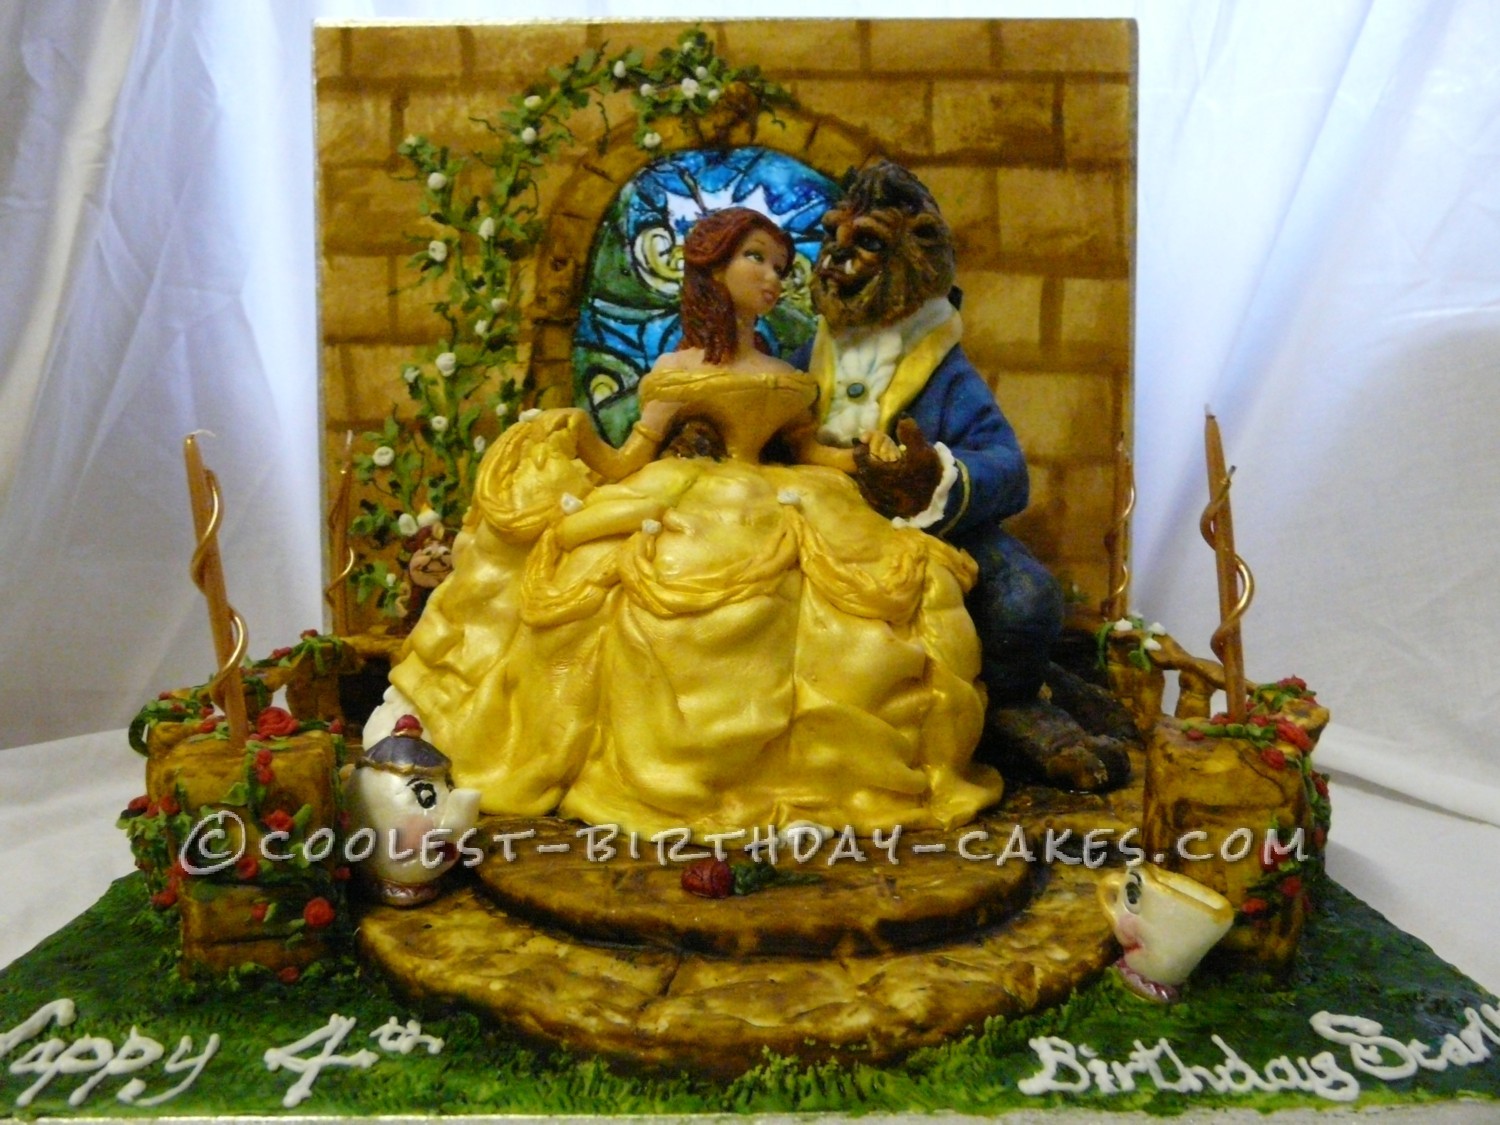 Coolest Beauty and the Beast Cake